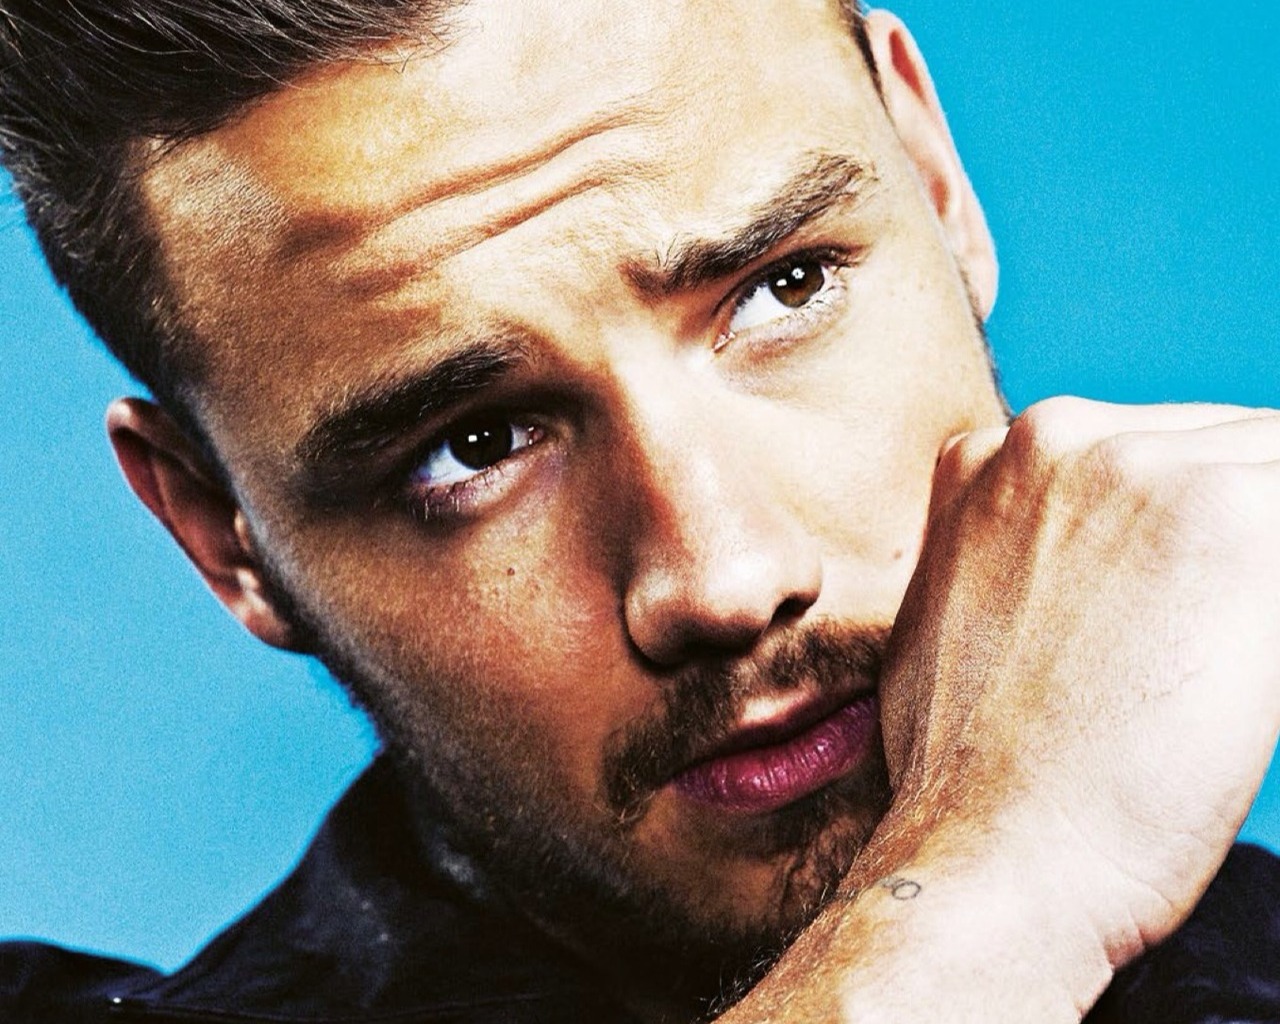 Liam Payne Wallpapers